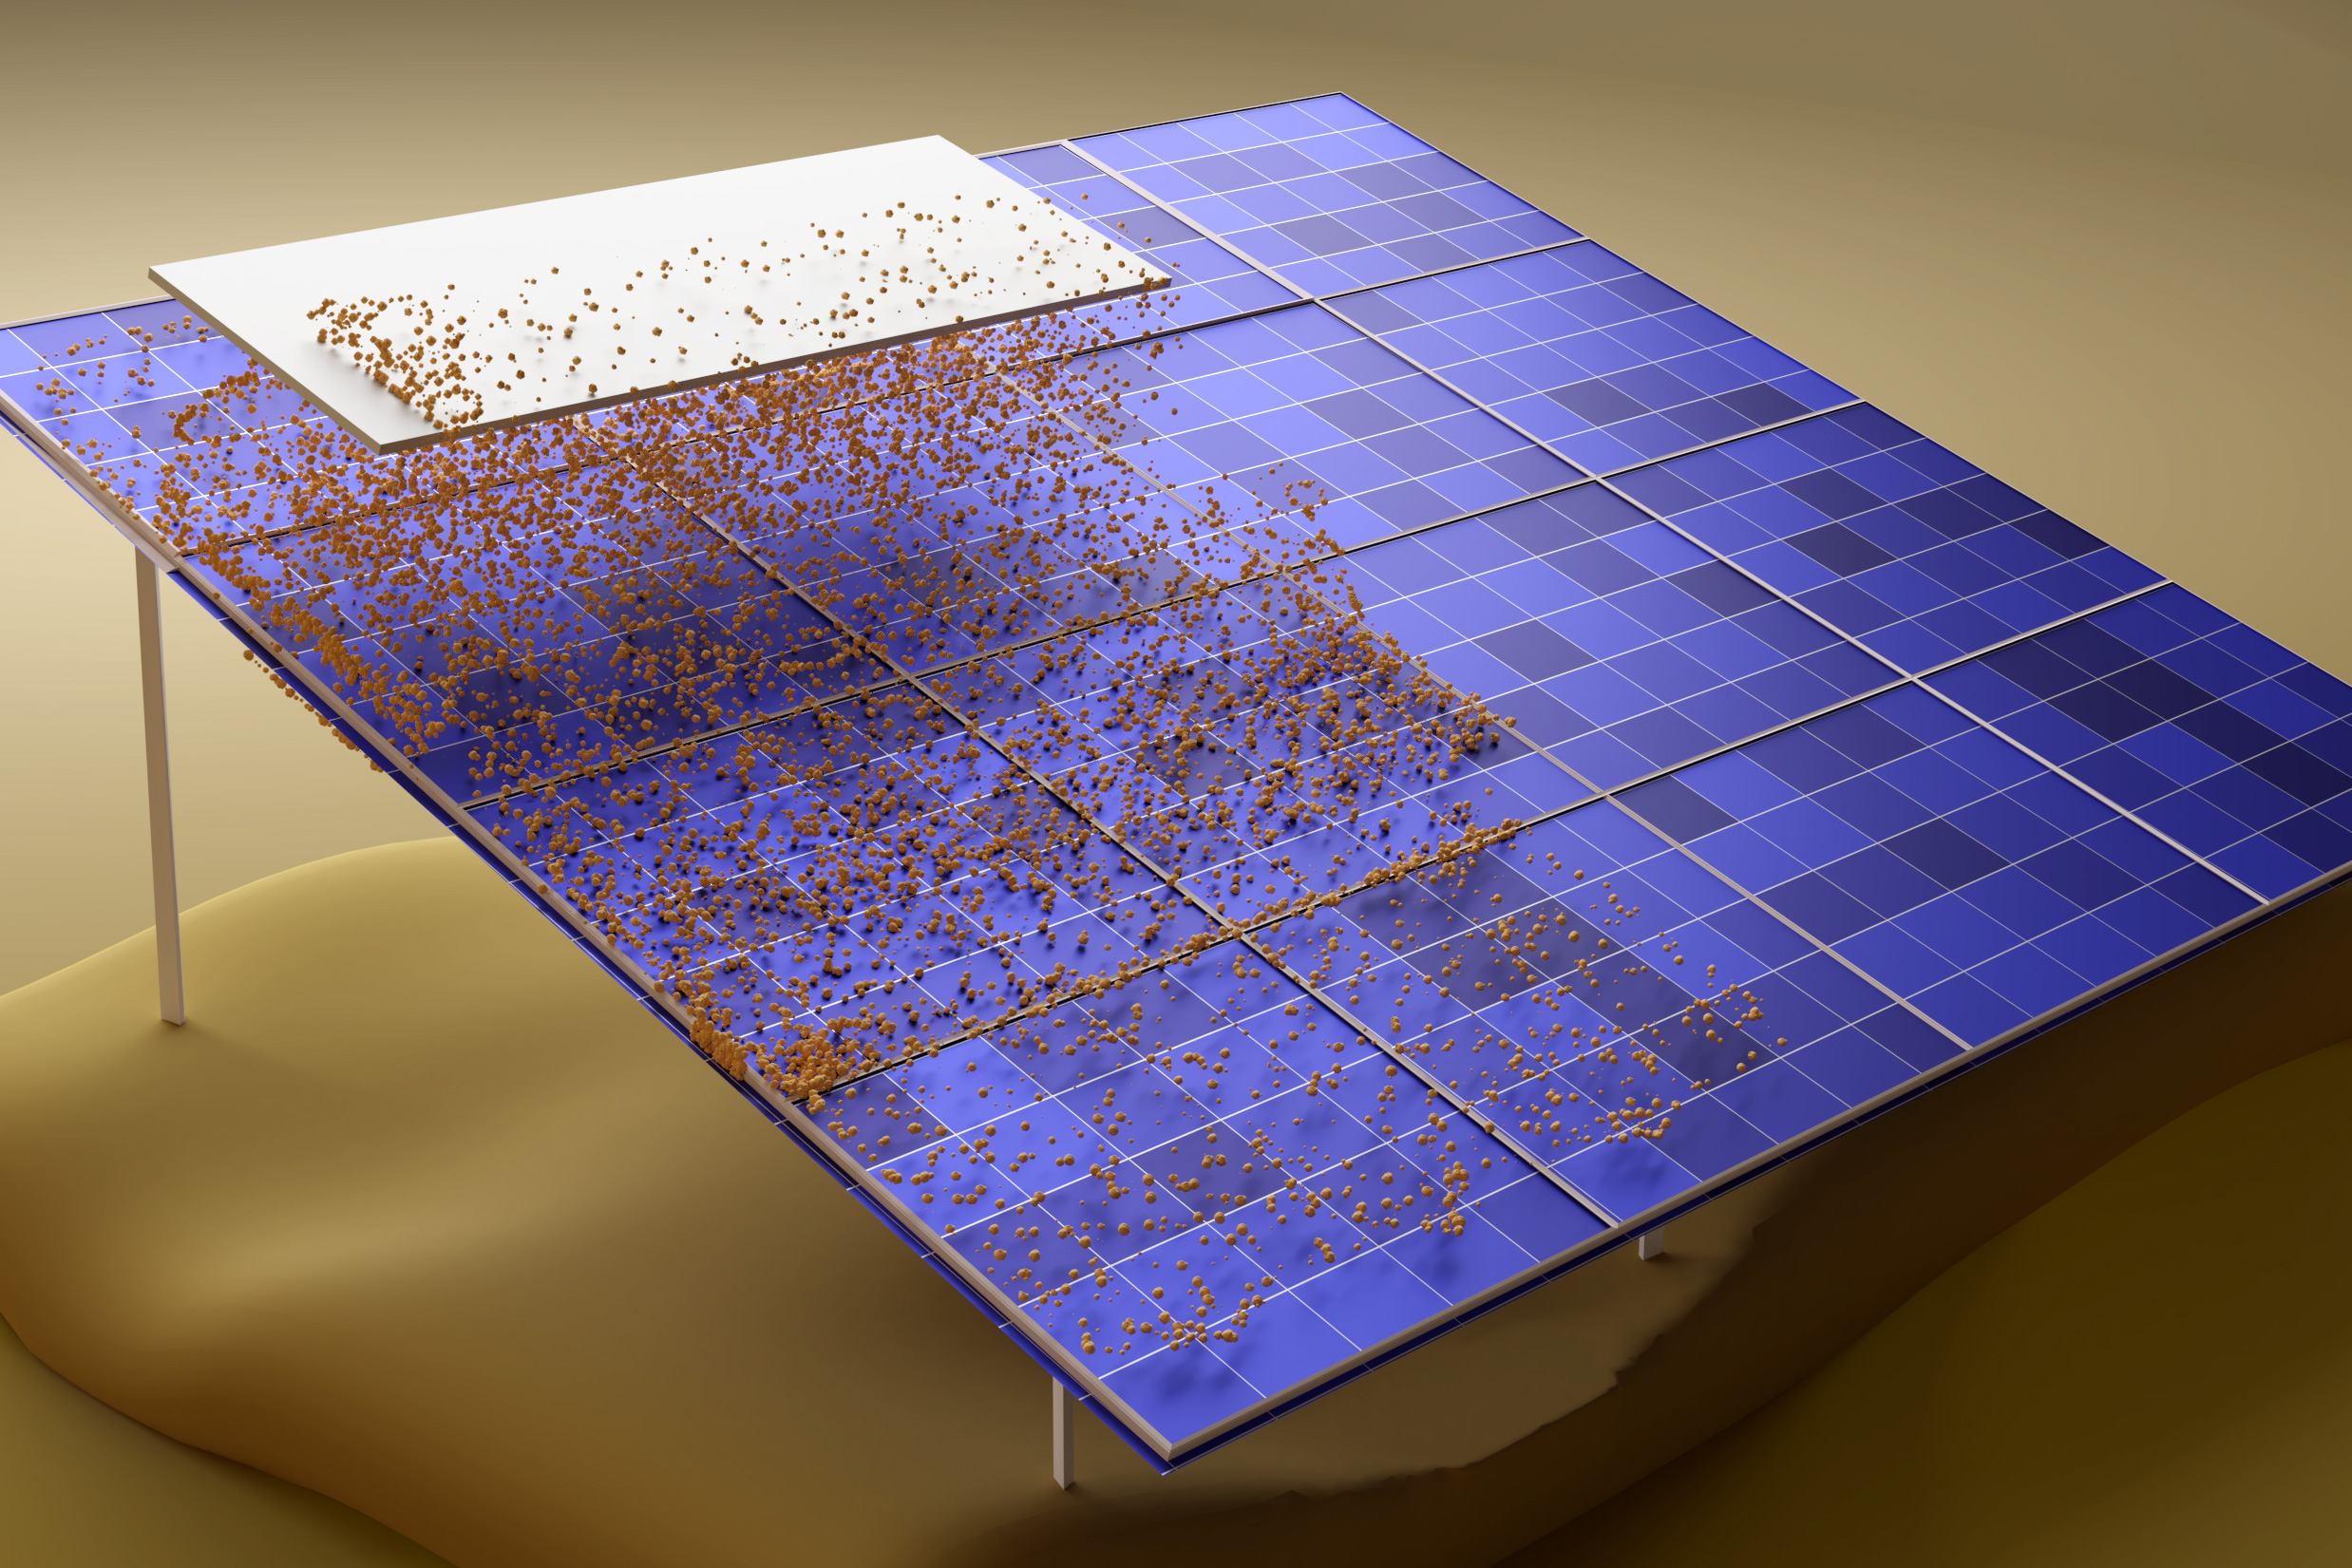 How to clean solar panels without water | MIT News